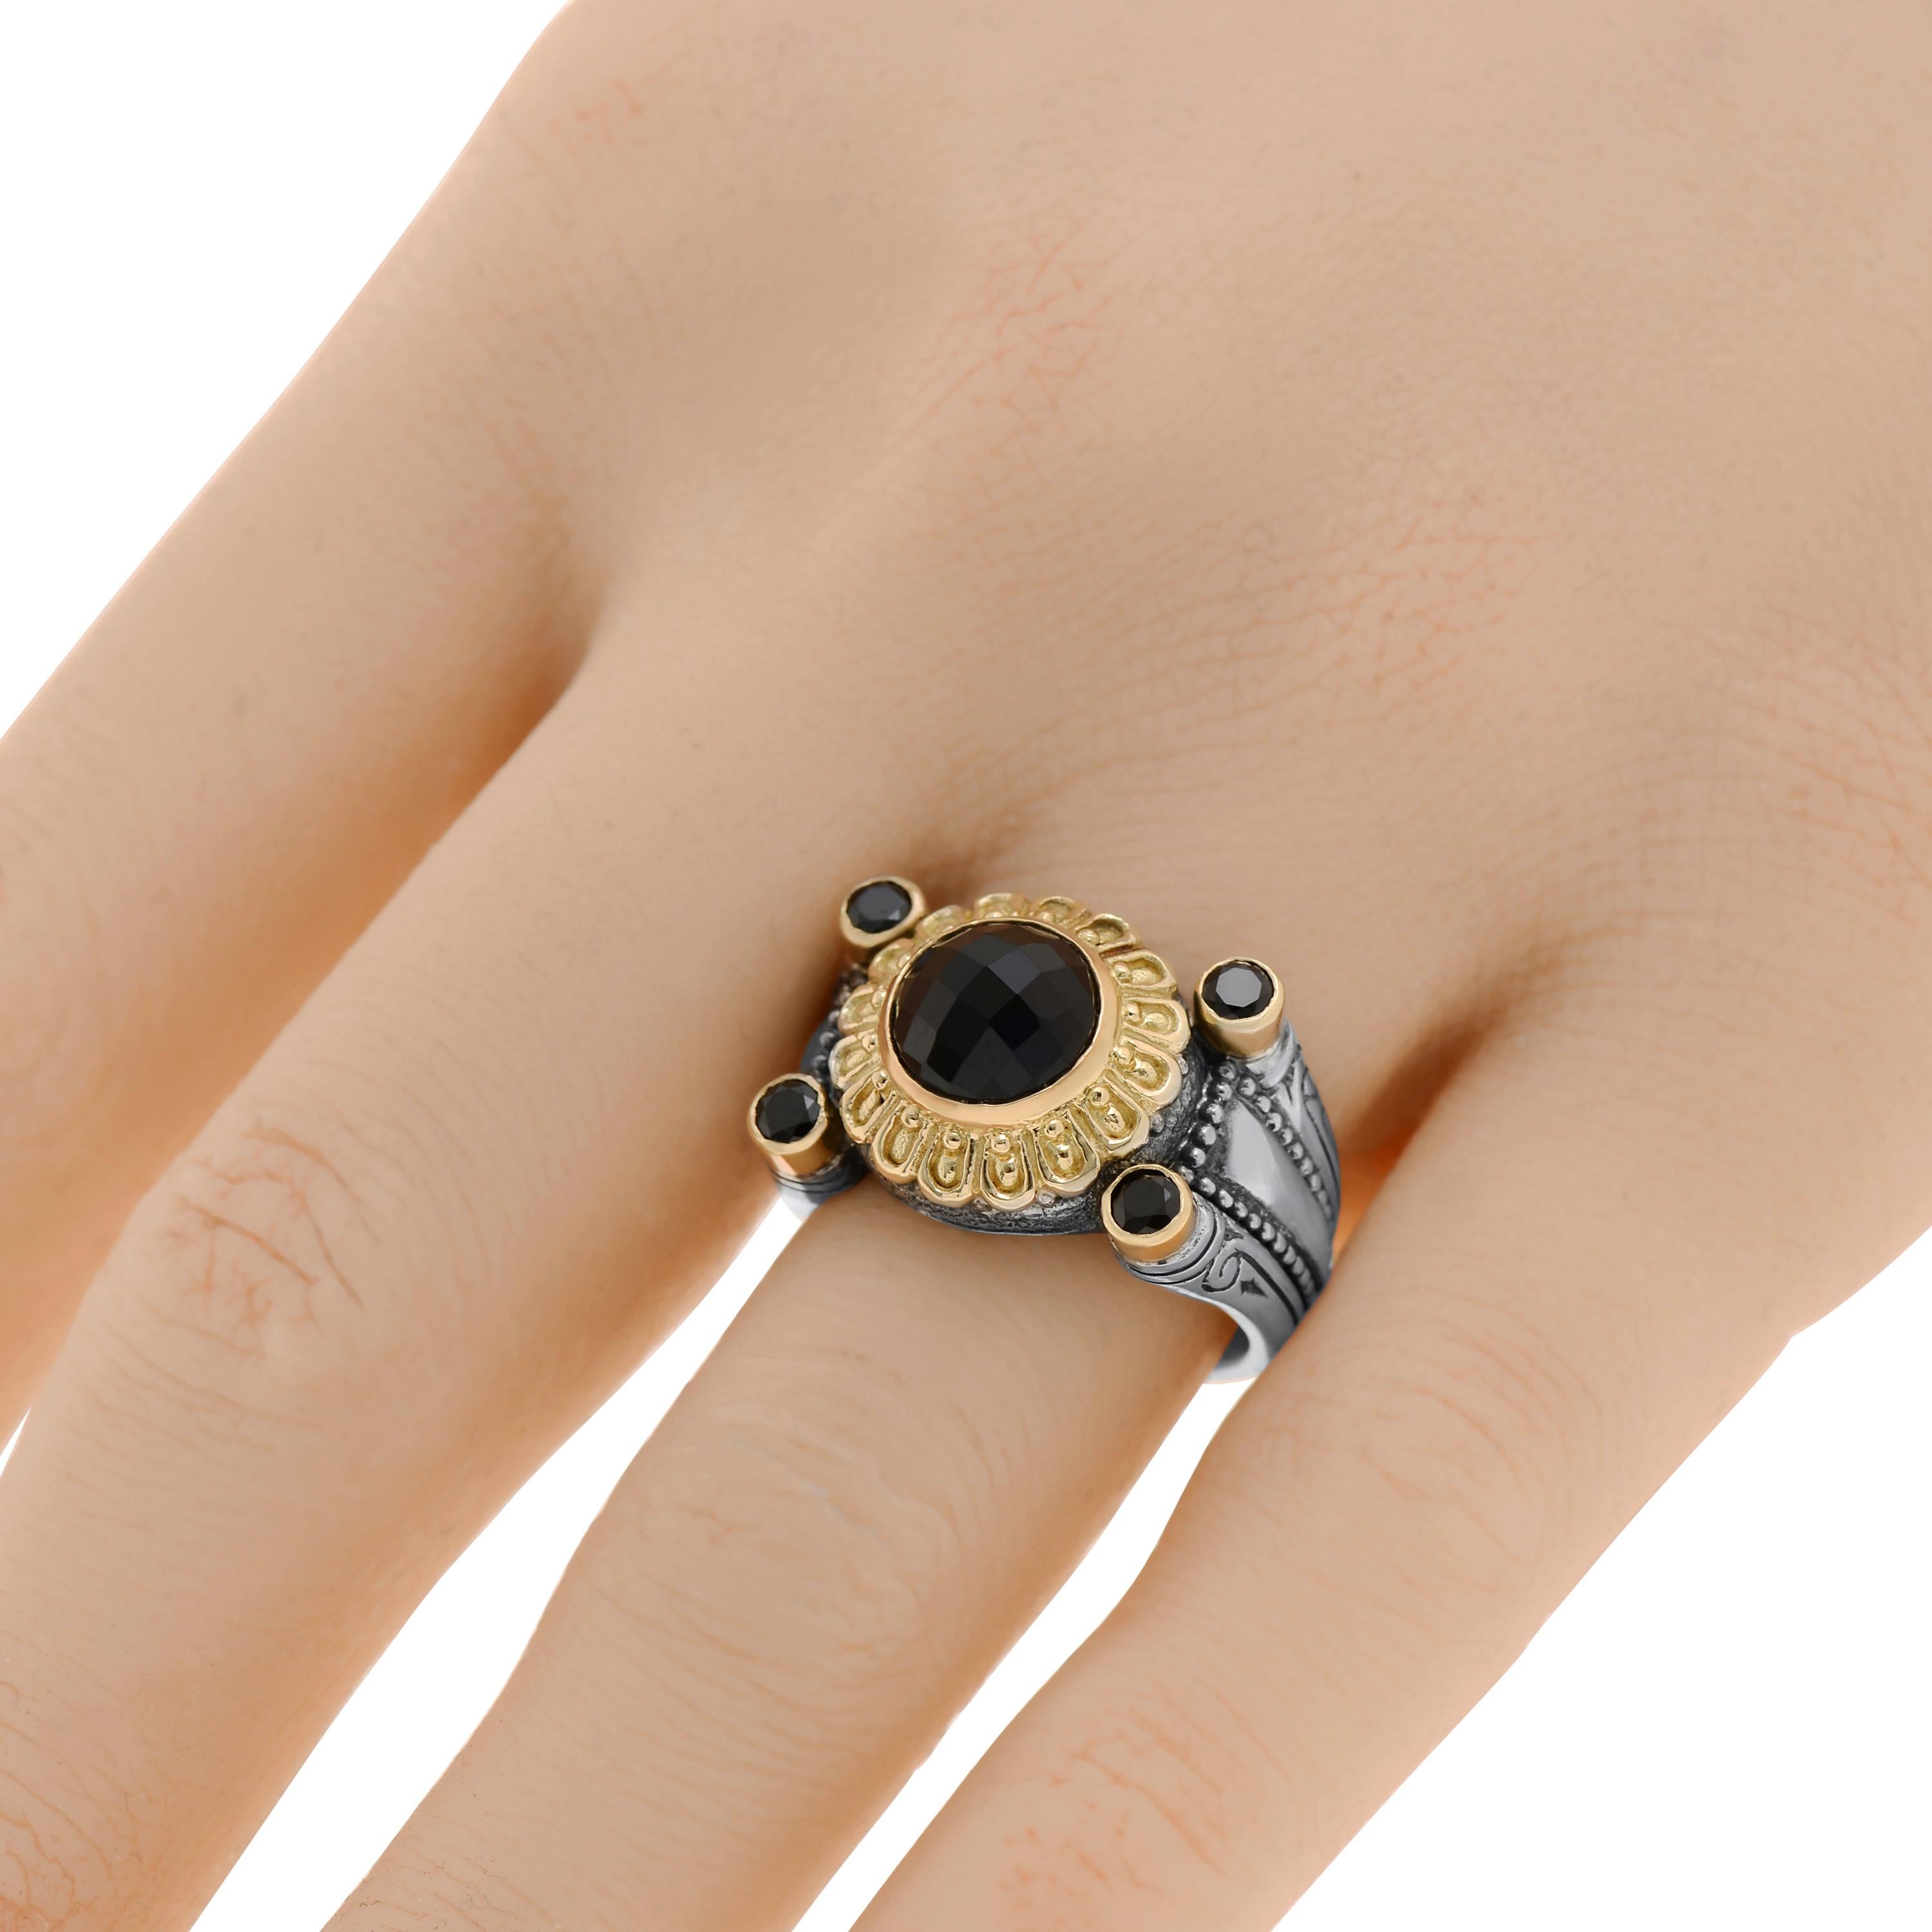 This bold Konstantino statement ring features onyx and black spinel set in sterling silver with 18K yellow gold accents. The decoration size is 3/4